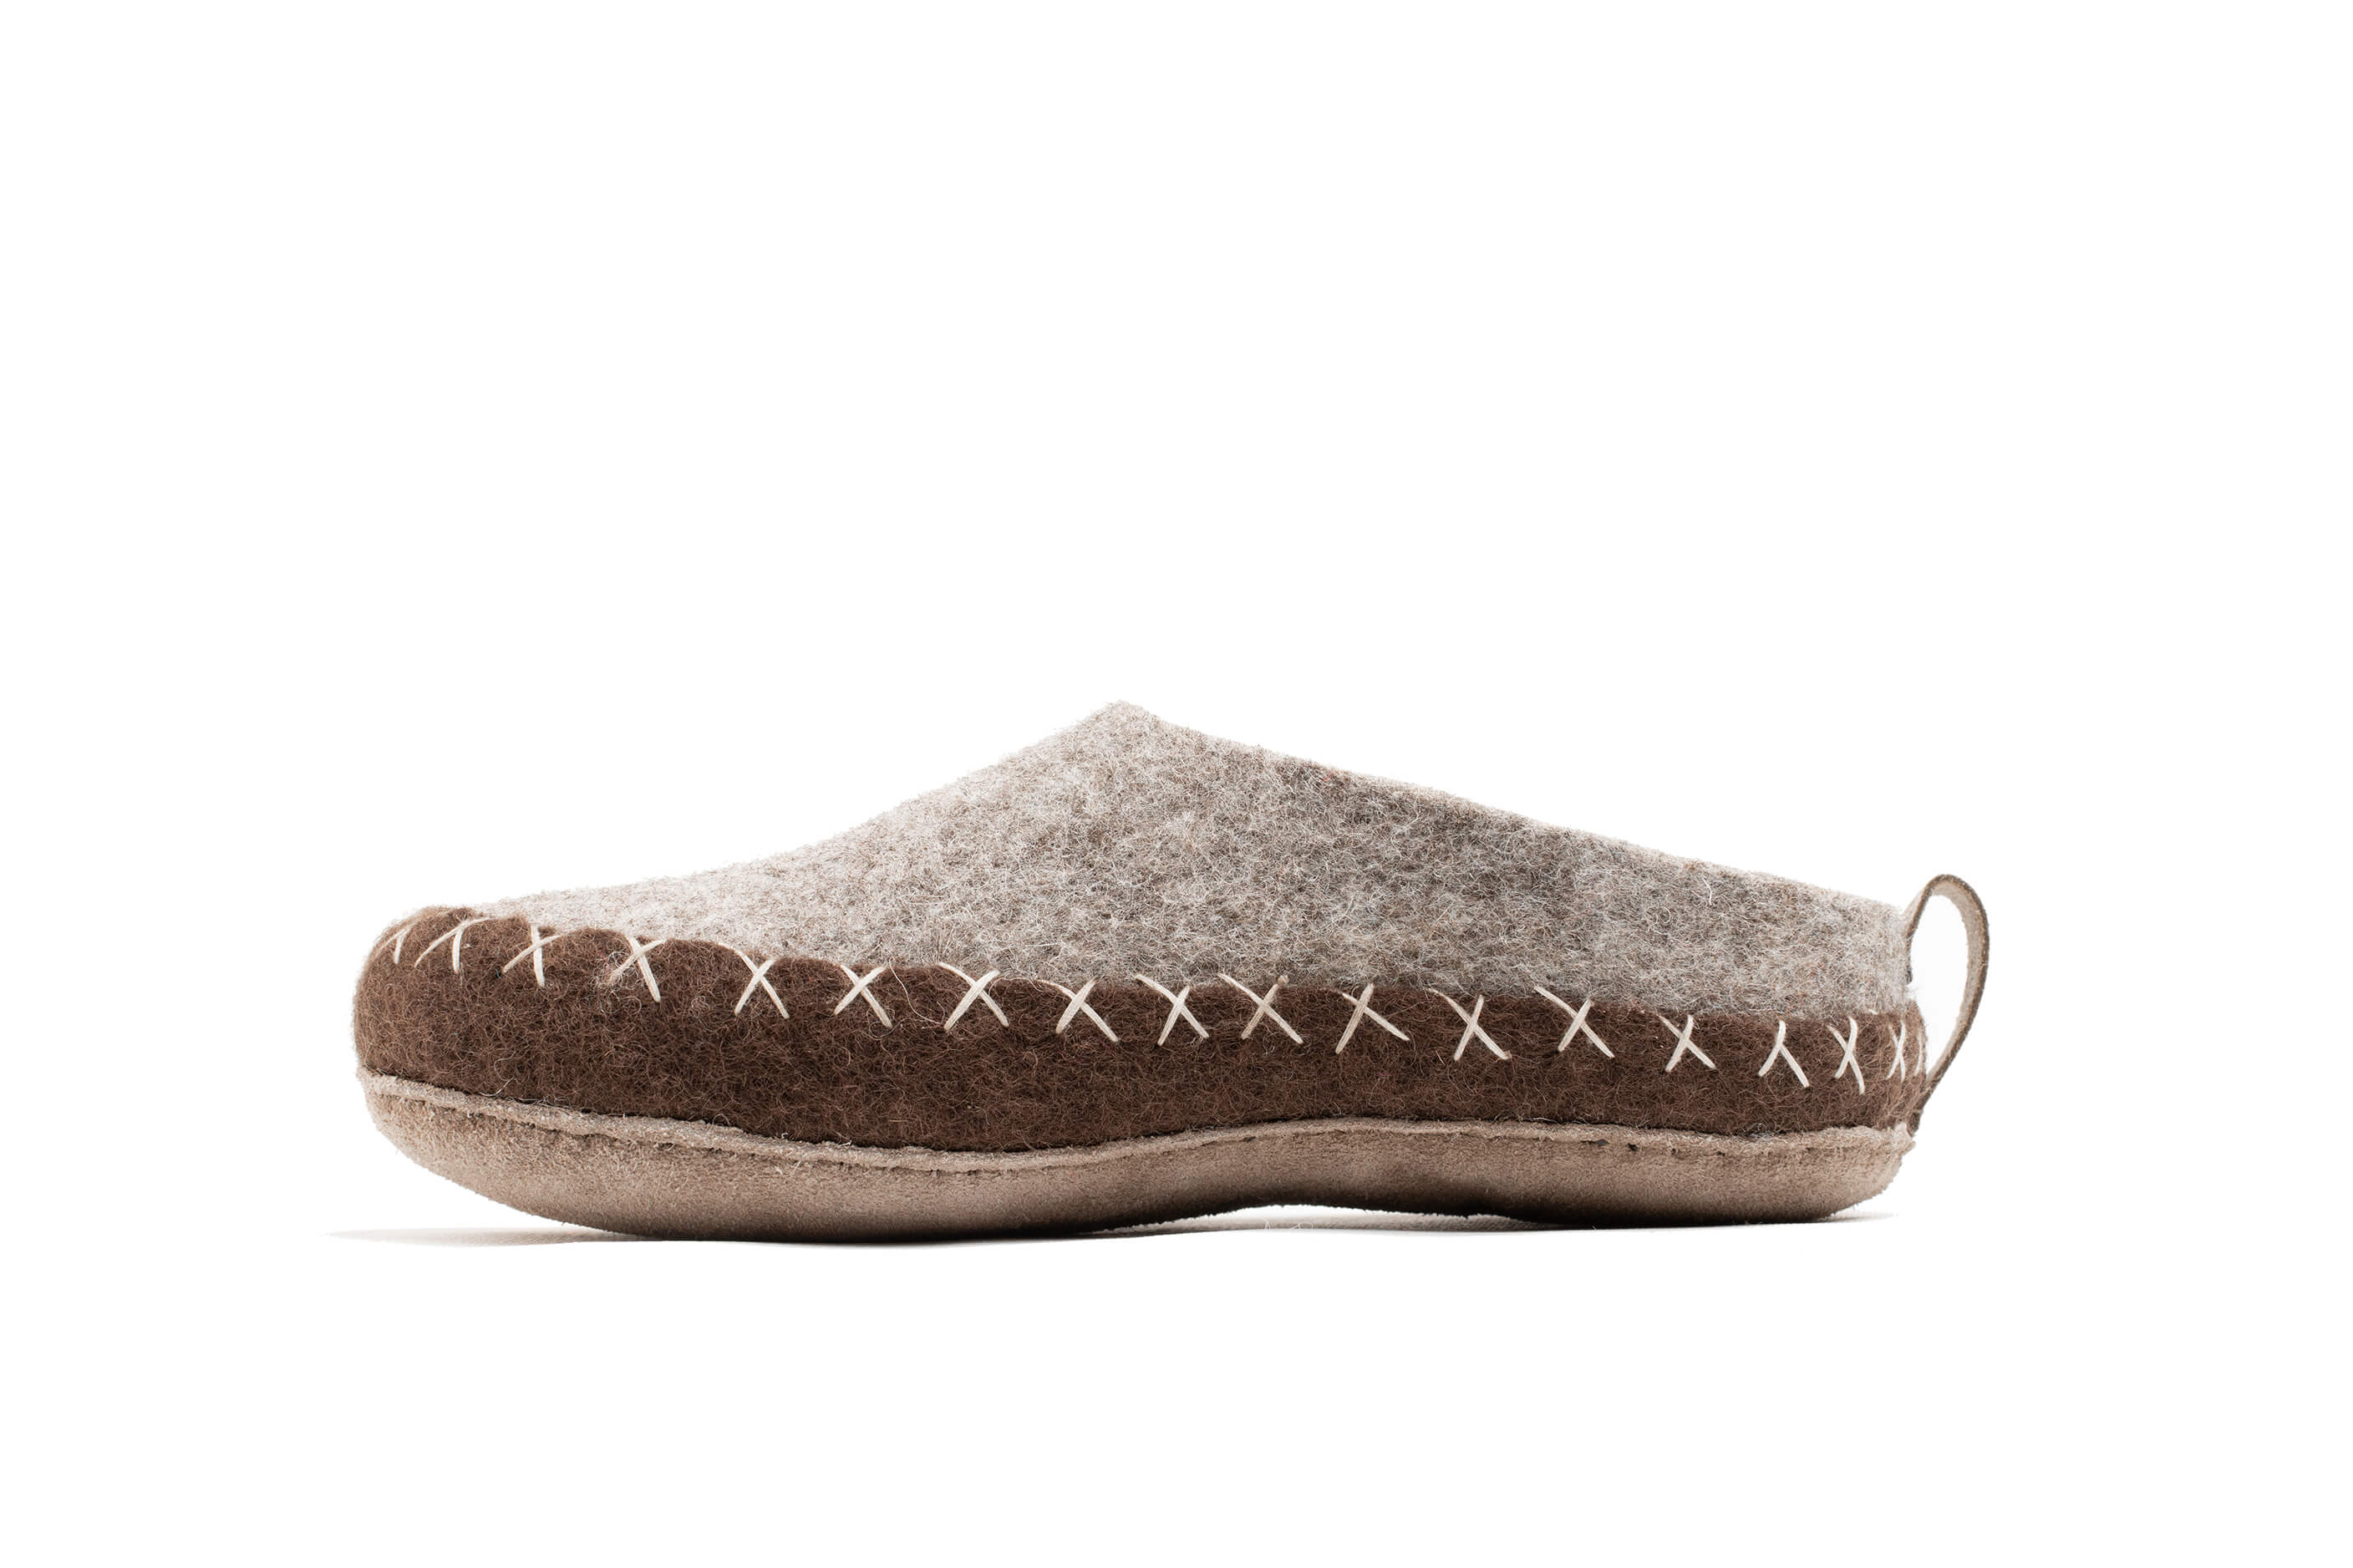 Indoor Open Heel Slipper With Leather Sole - Natural Brown & Light Brown